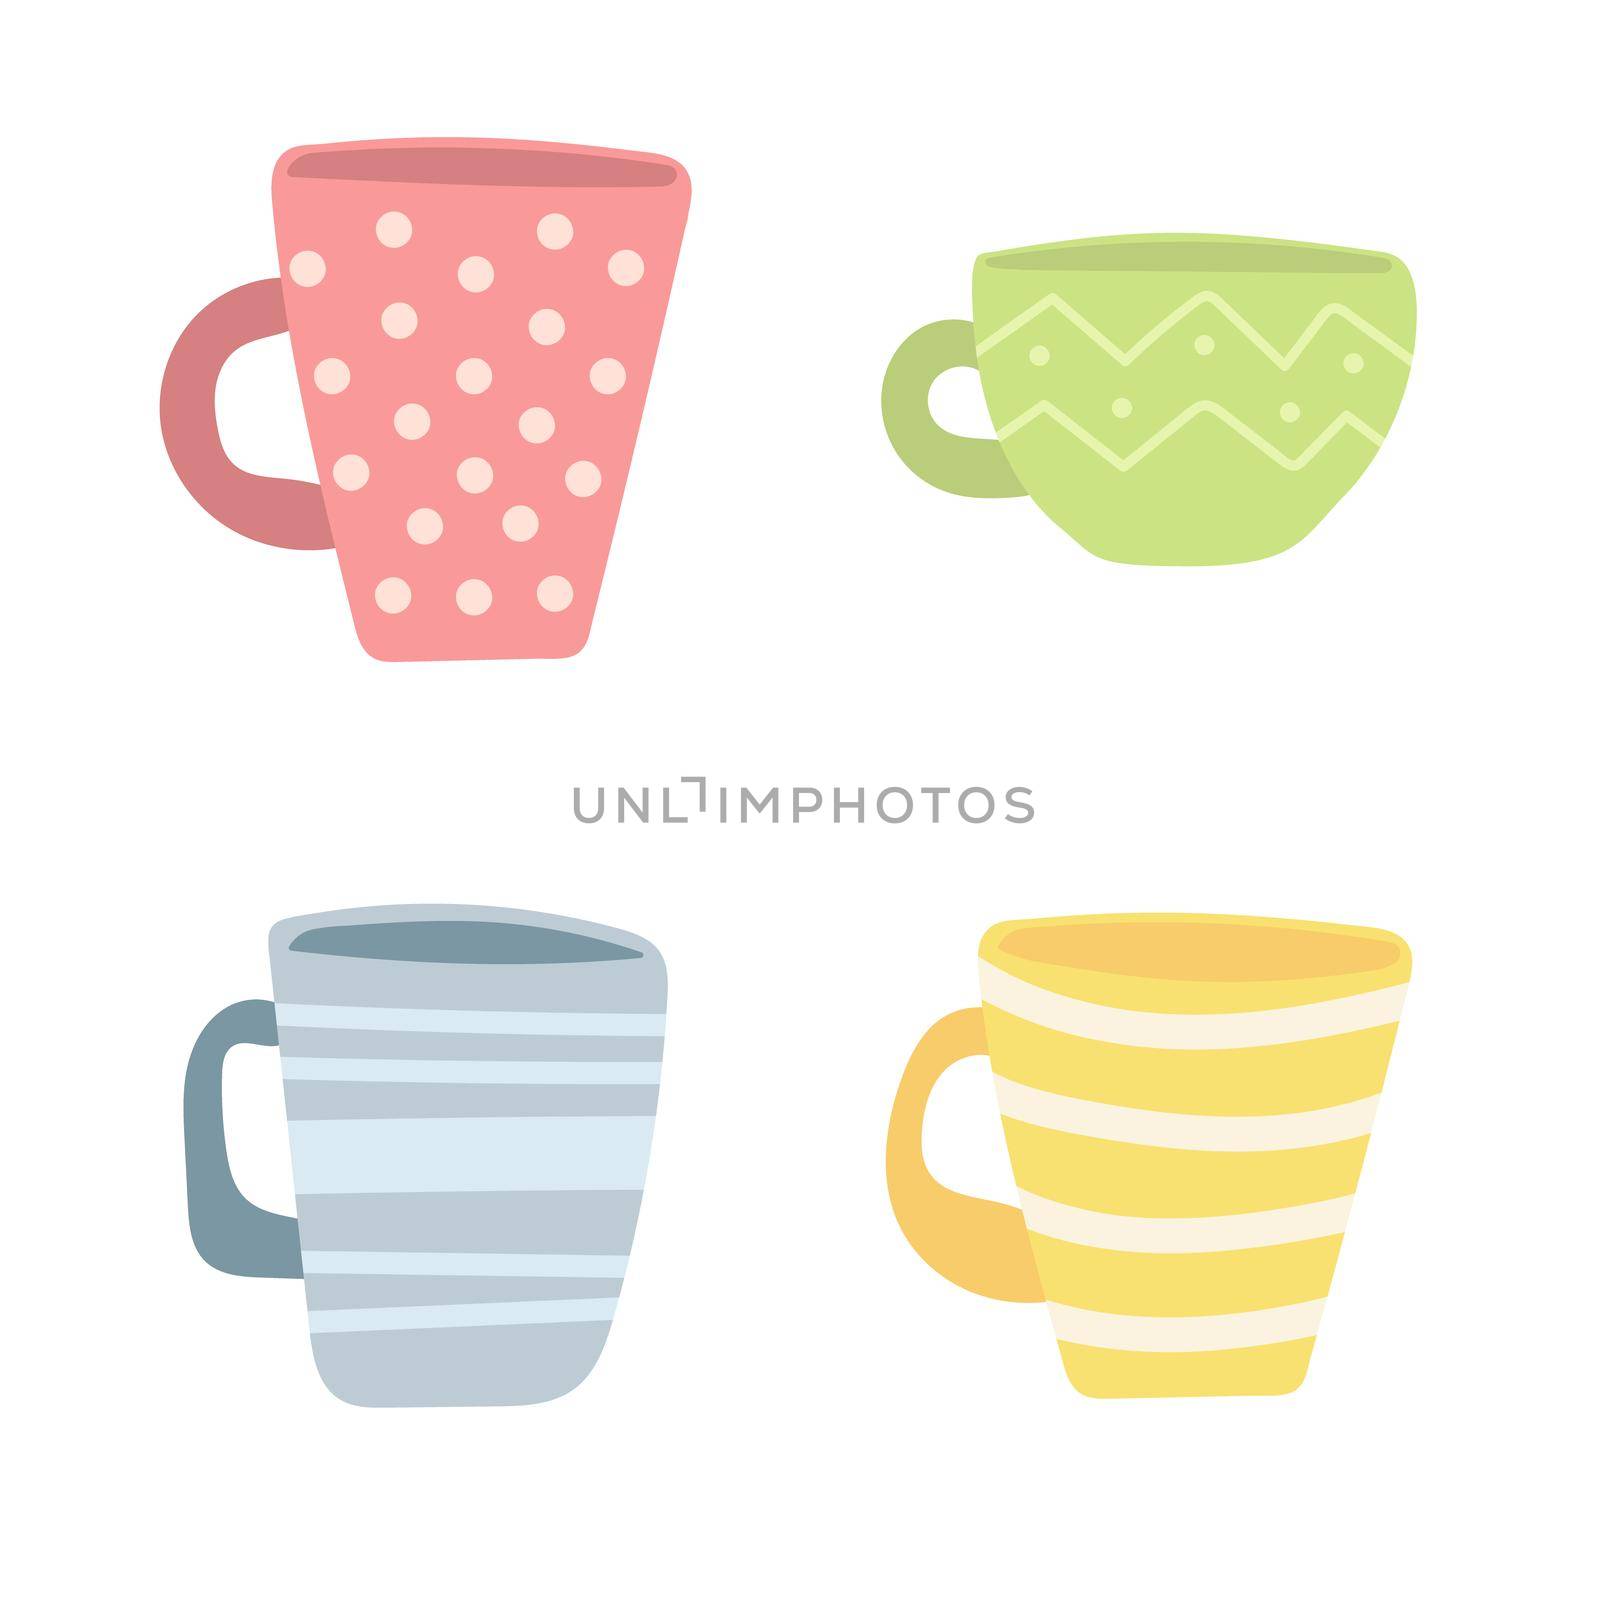 Cups. Simple cartoon drawing of vector cups on white. Set of hand drawn icons